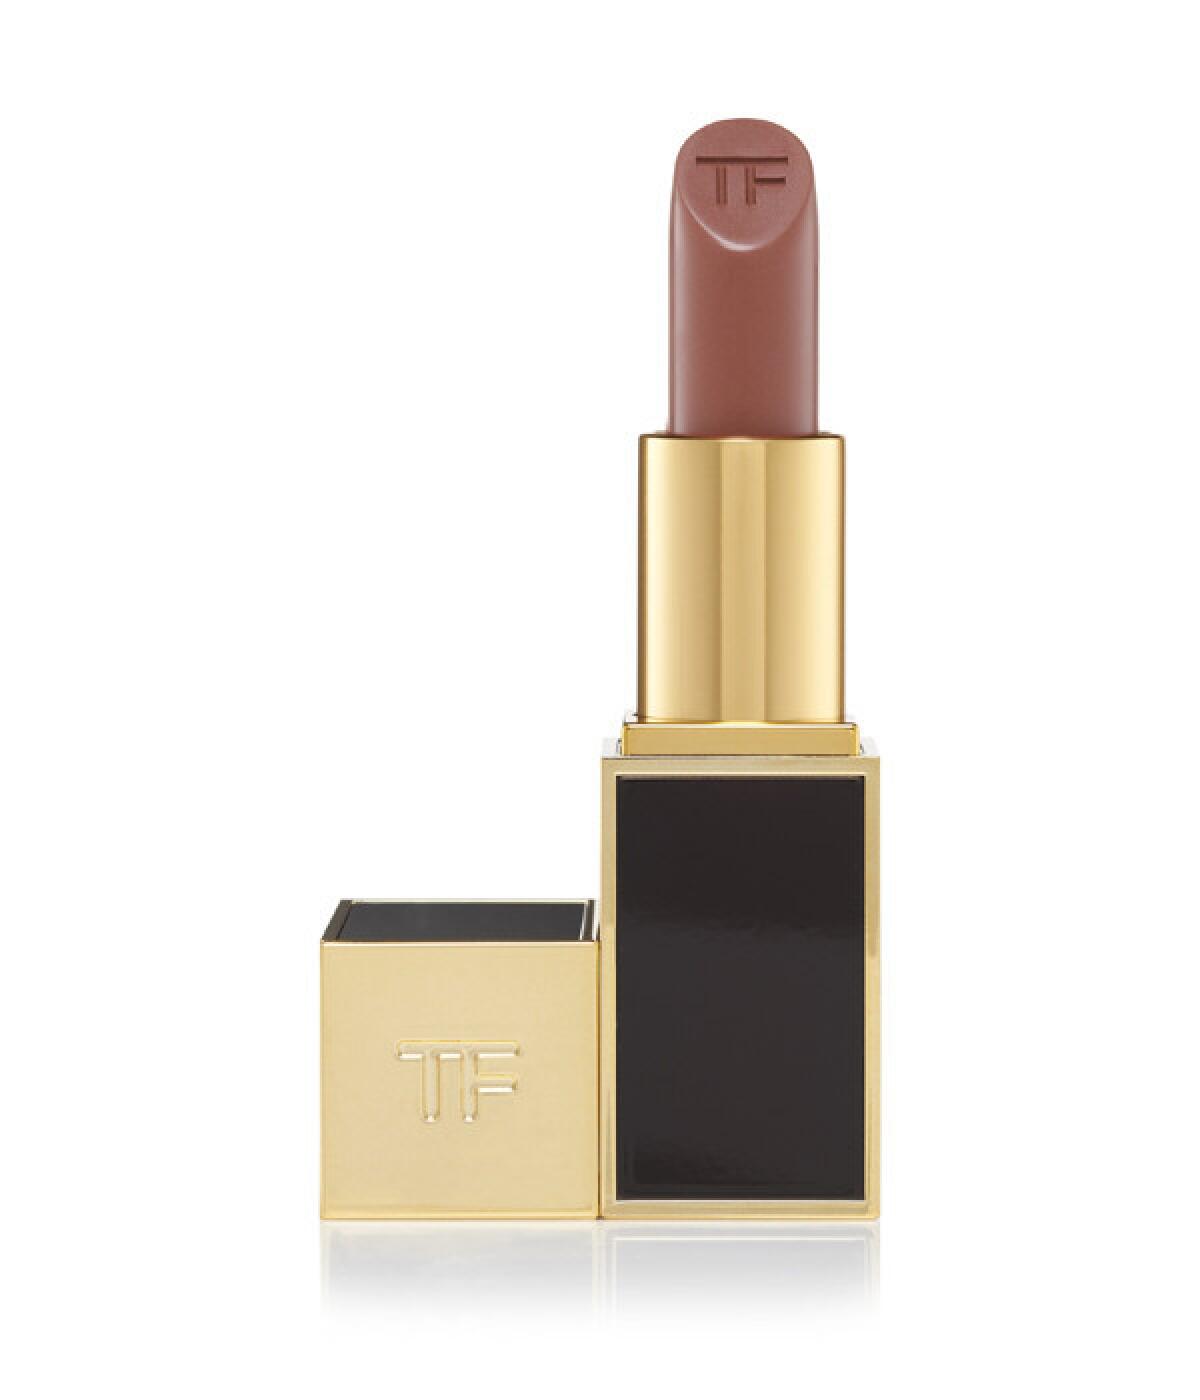 Tom Ford Beauty Lip Color lipstick in Negligee, $50 at tomford.com; courtesy of Tom Ford Beauty